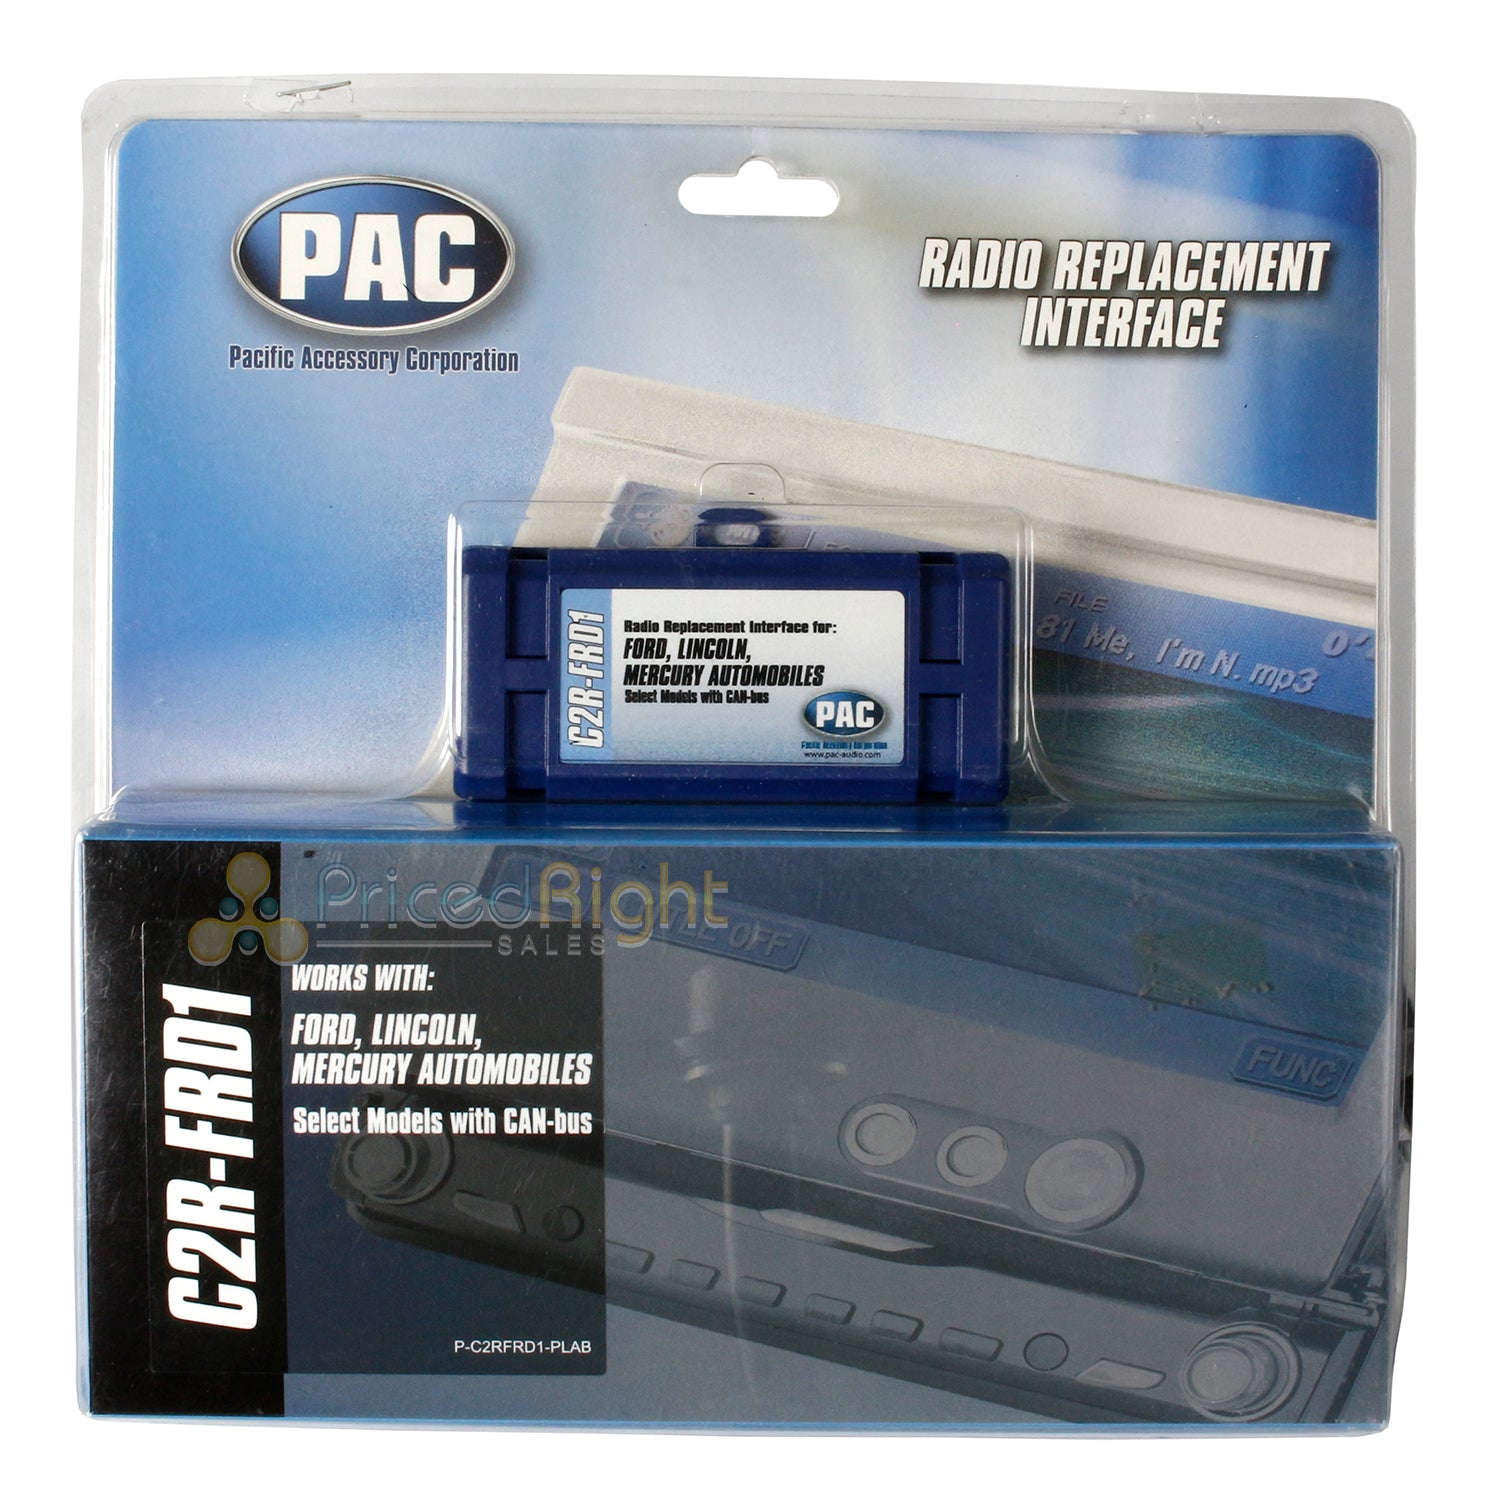 PAC Radio Replacement and Steering Wheel Control Interface for